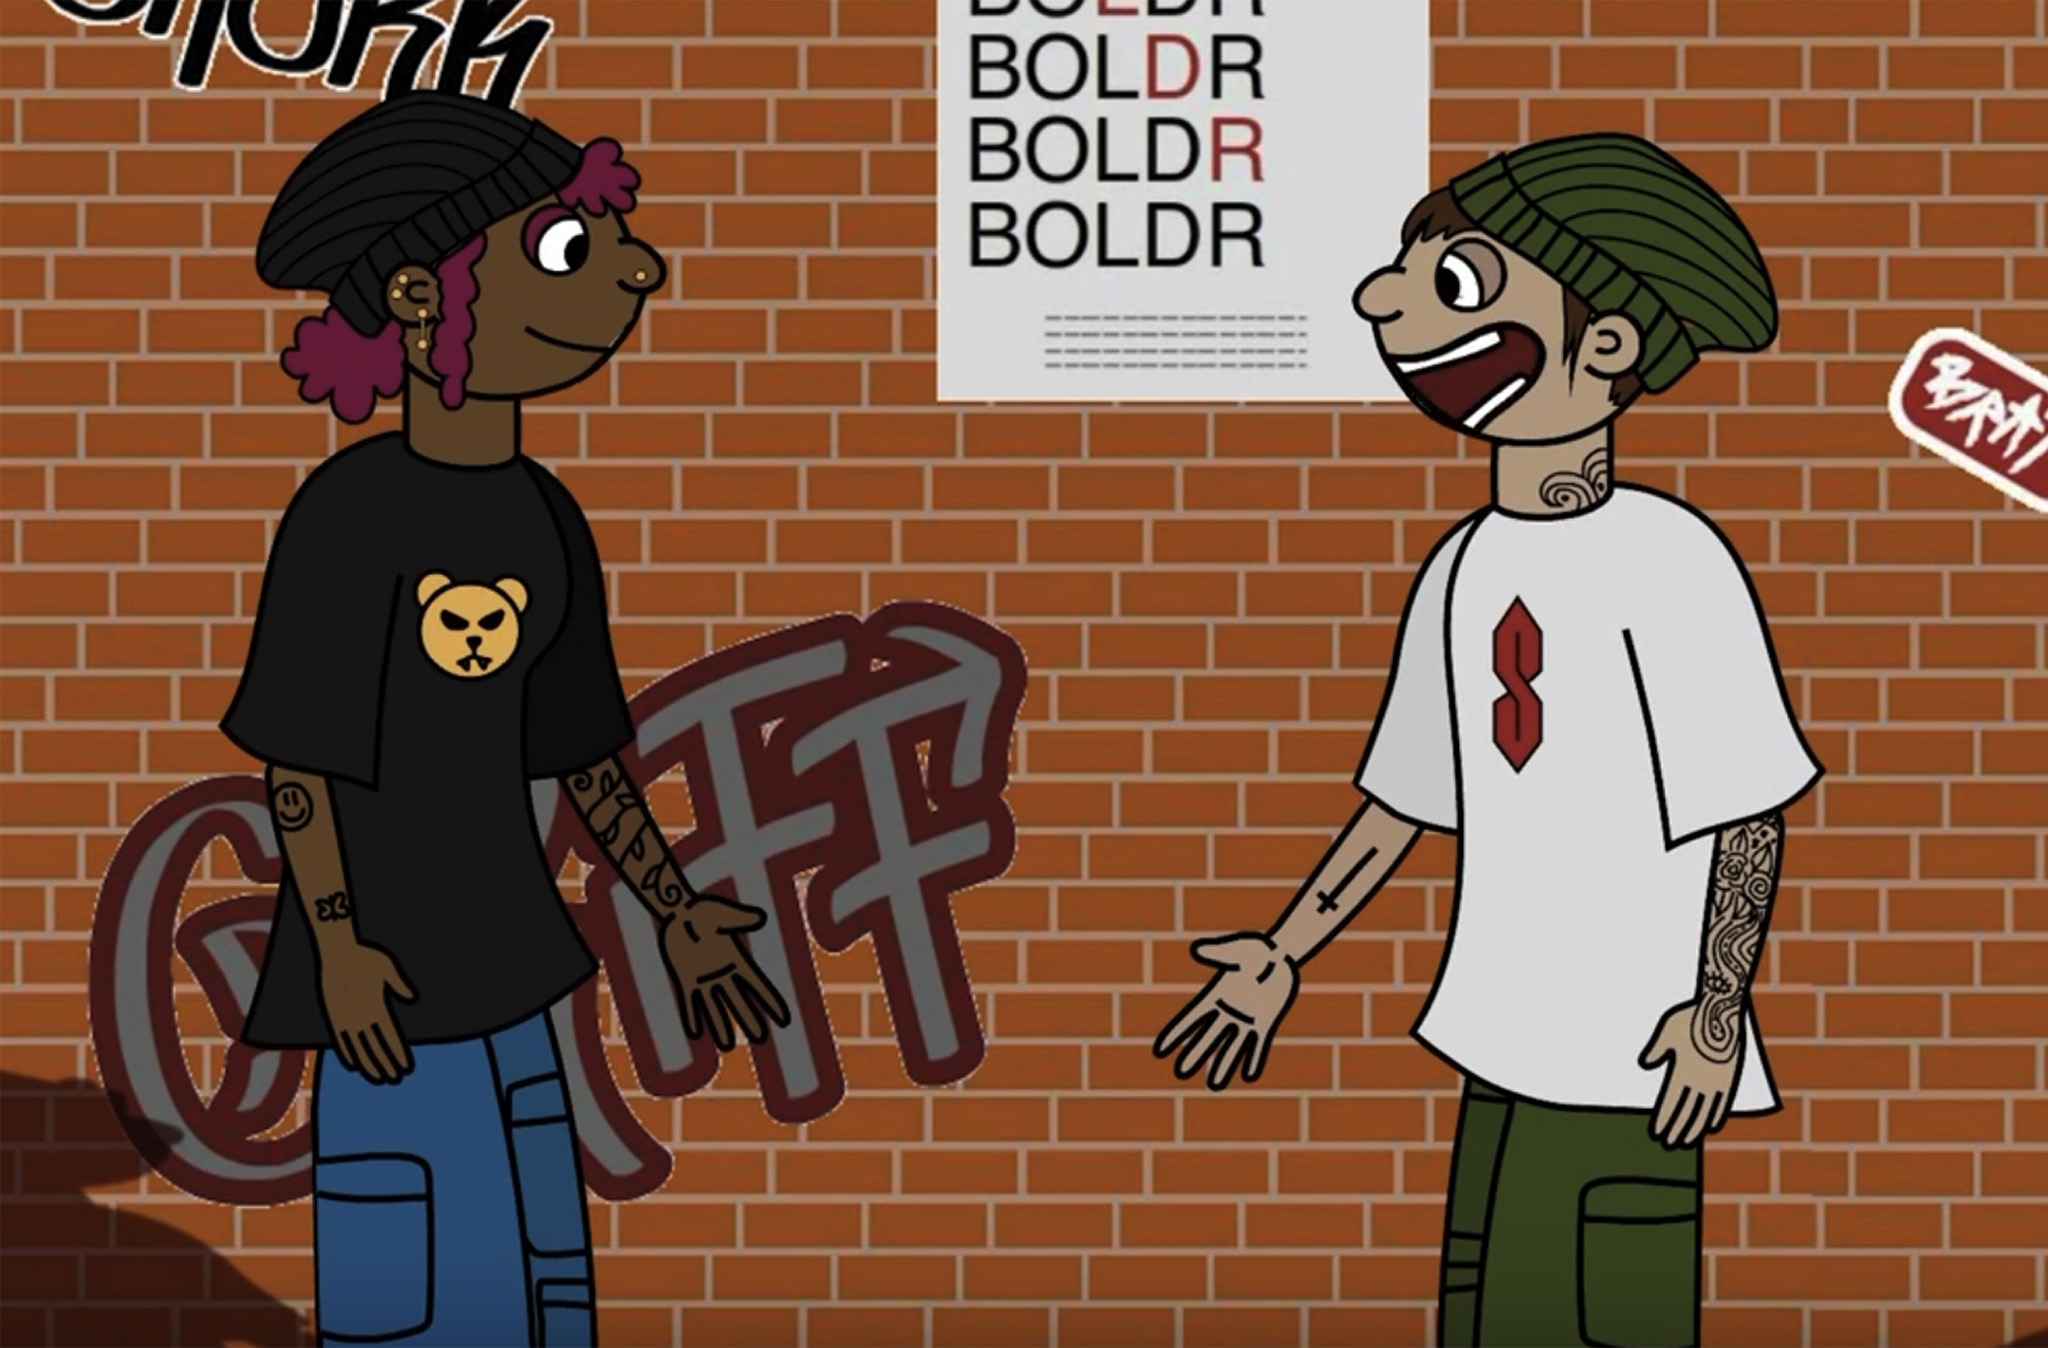 Thumbnail of two animated skaters talking in front of a brick wall.